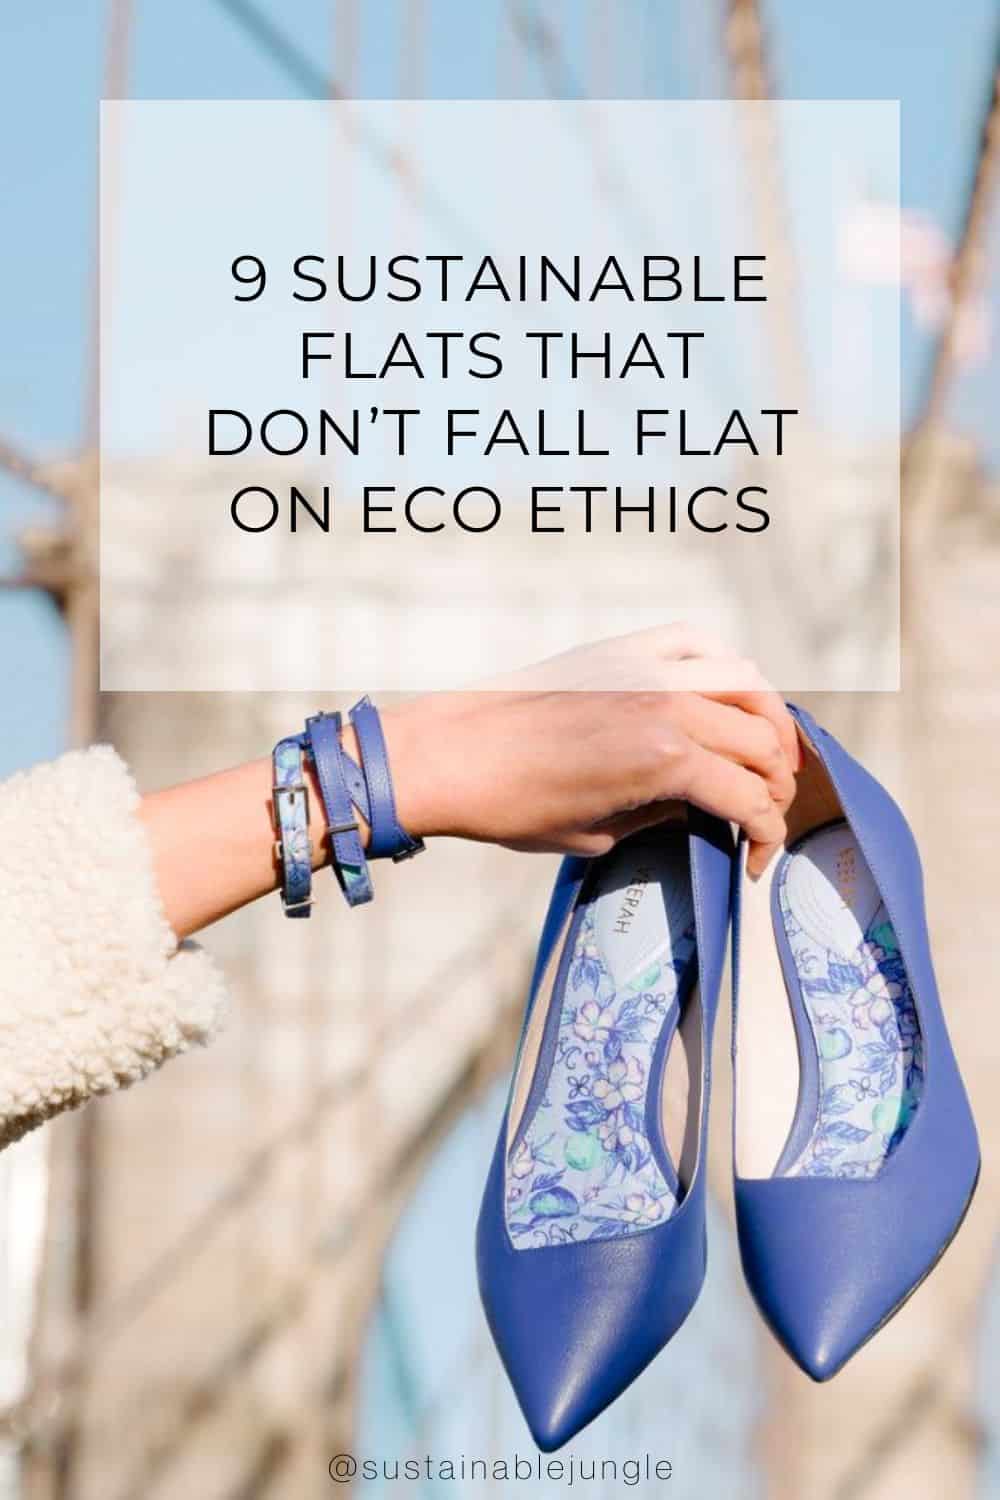 9 Sustainable Flats That Don’t Fall Flat On Eco Ethics Image by Veerah #sustainableflats #ecofriendlyflats #sustainableballetflats #ecofriendlyflats #recycledflats #sustainablewomensflats #sustainablejungle